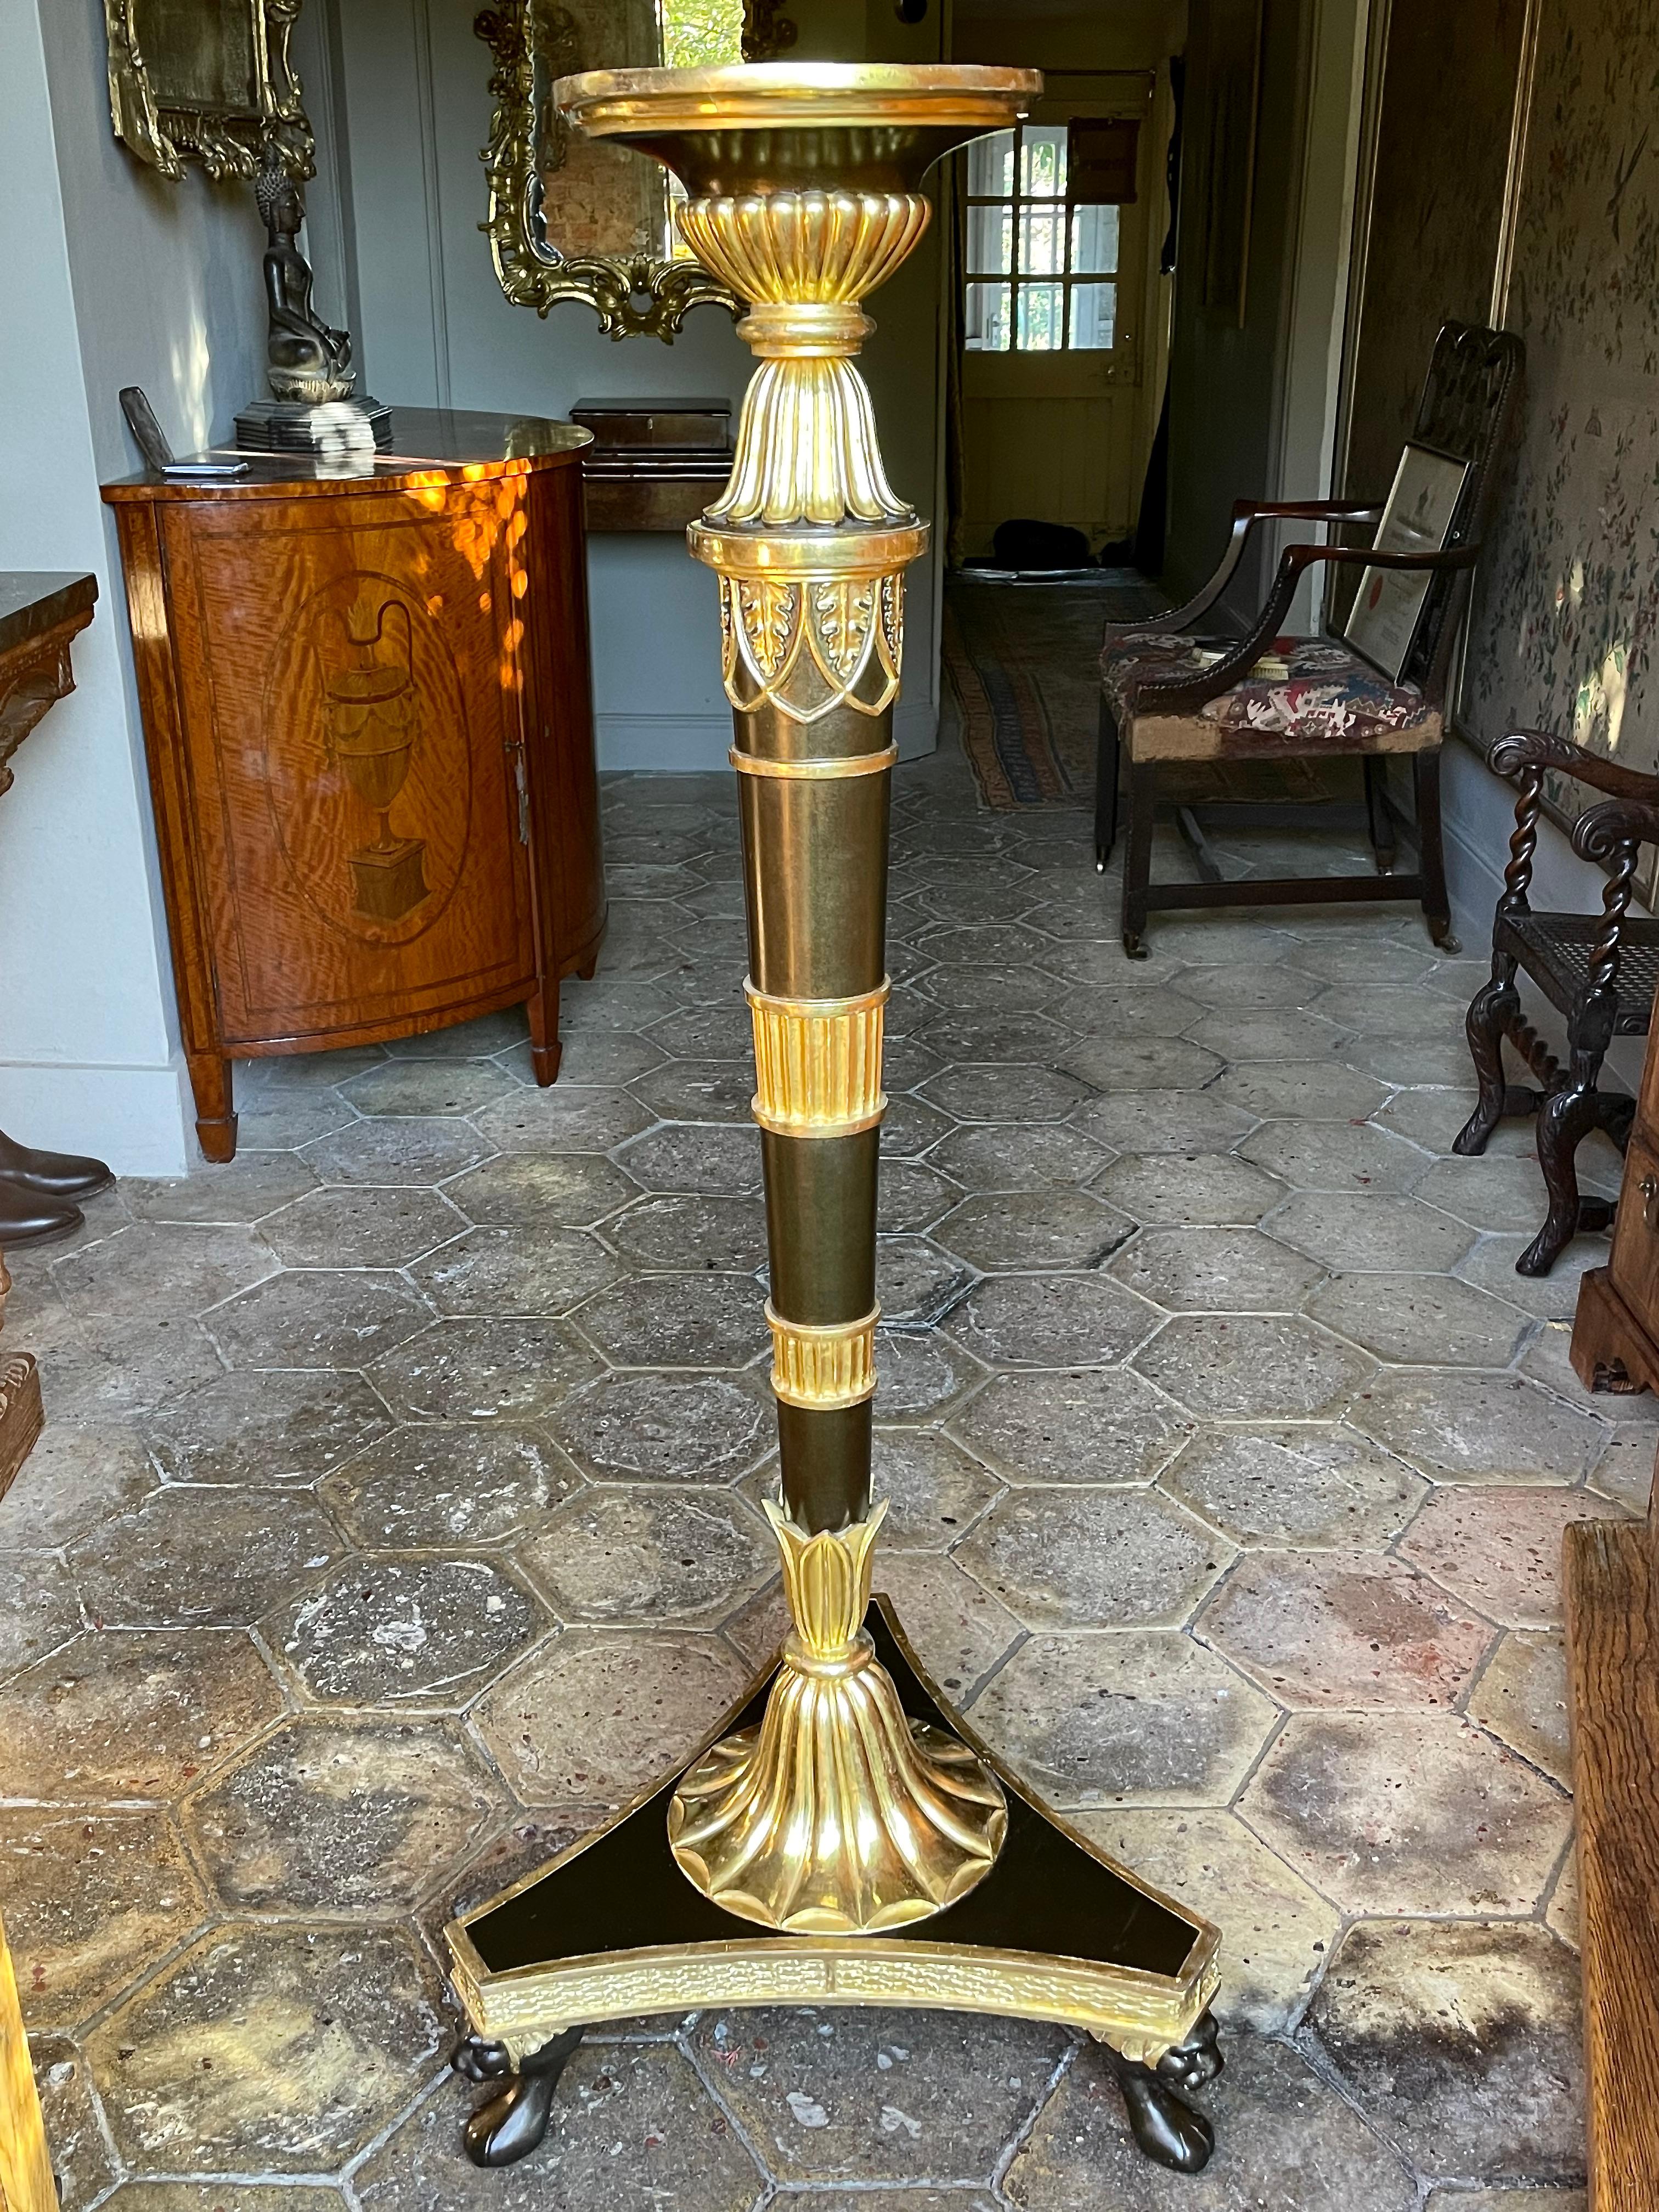 A fine and rare pair of English Regency period torchères, or stands (or candle stands) in the manner of Thomas Hope. Circa 1810.

Both are raised on tapering simulated-bronze column supports with circular tops and fluted gilt collars, on